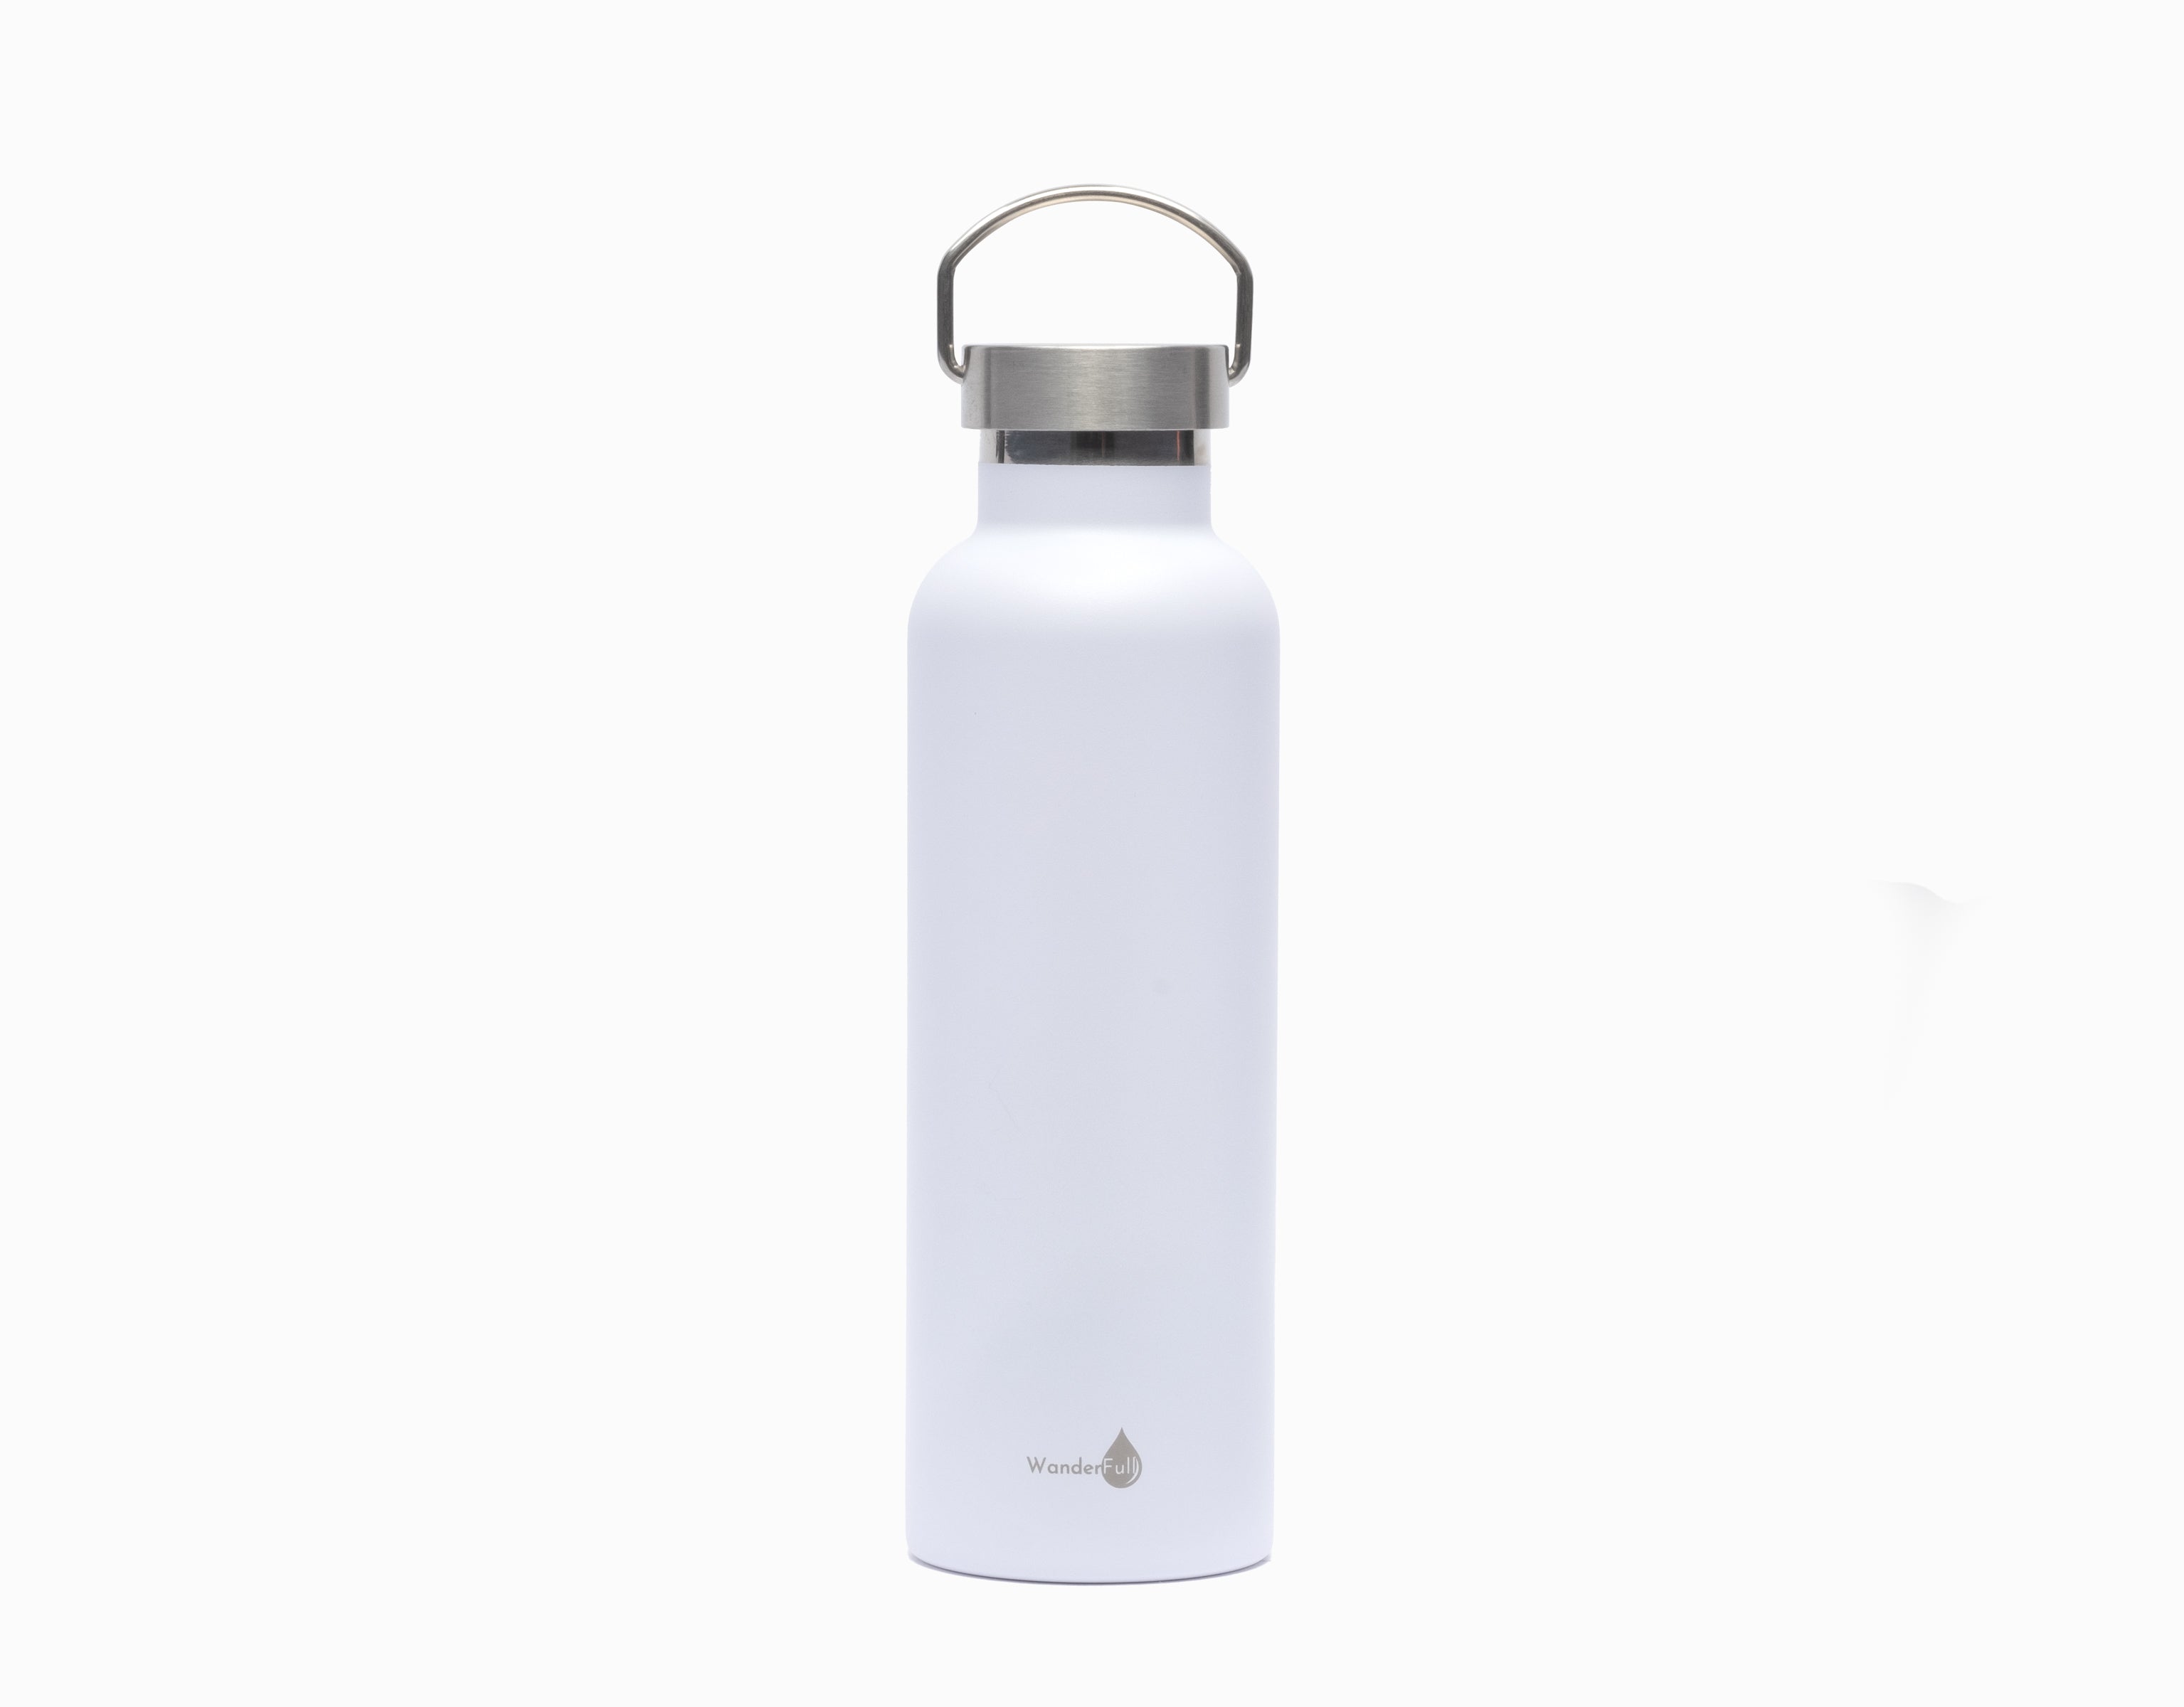 Wholesale - White with Silver Top WanderFull Water Bottle- 24 Oz